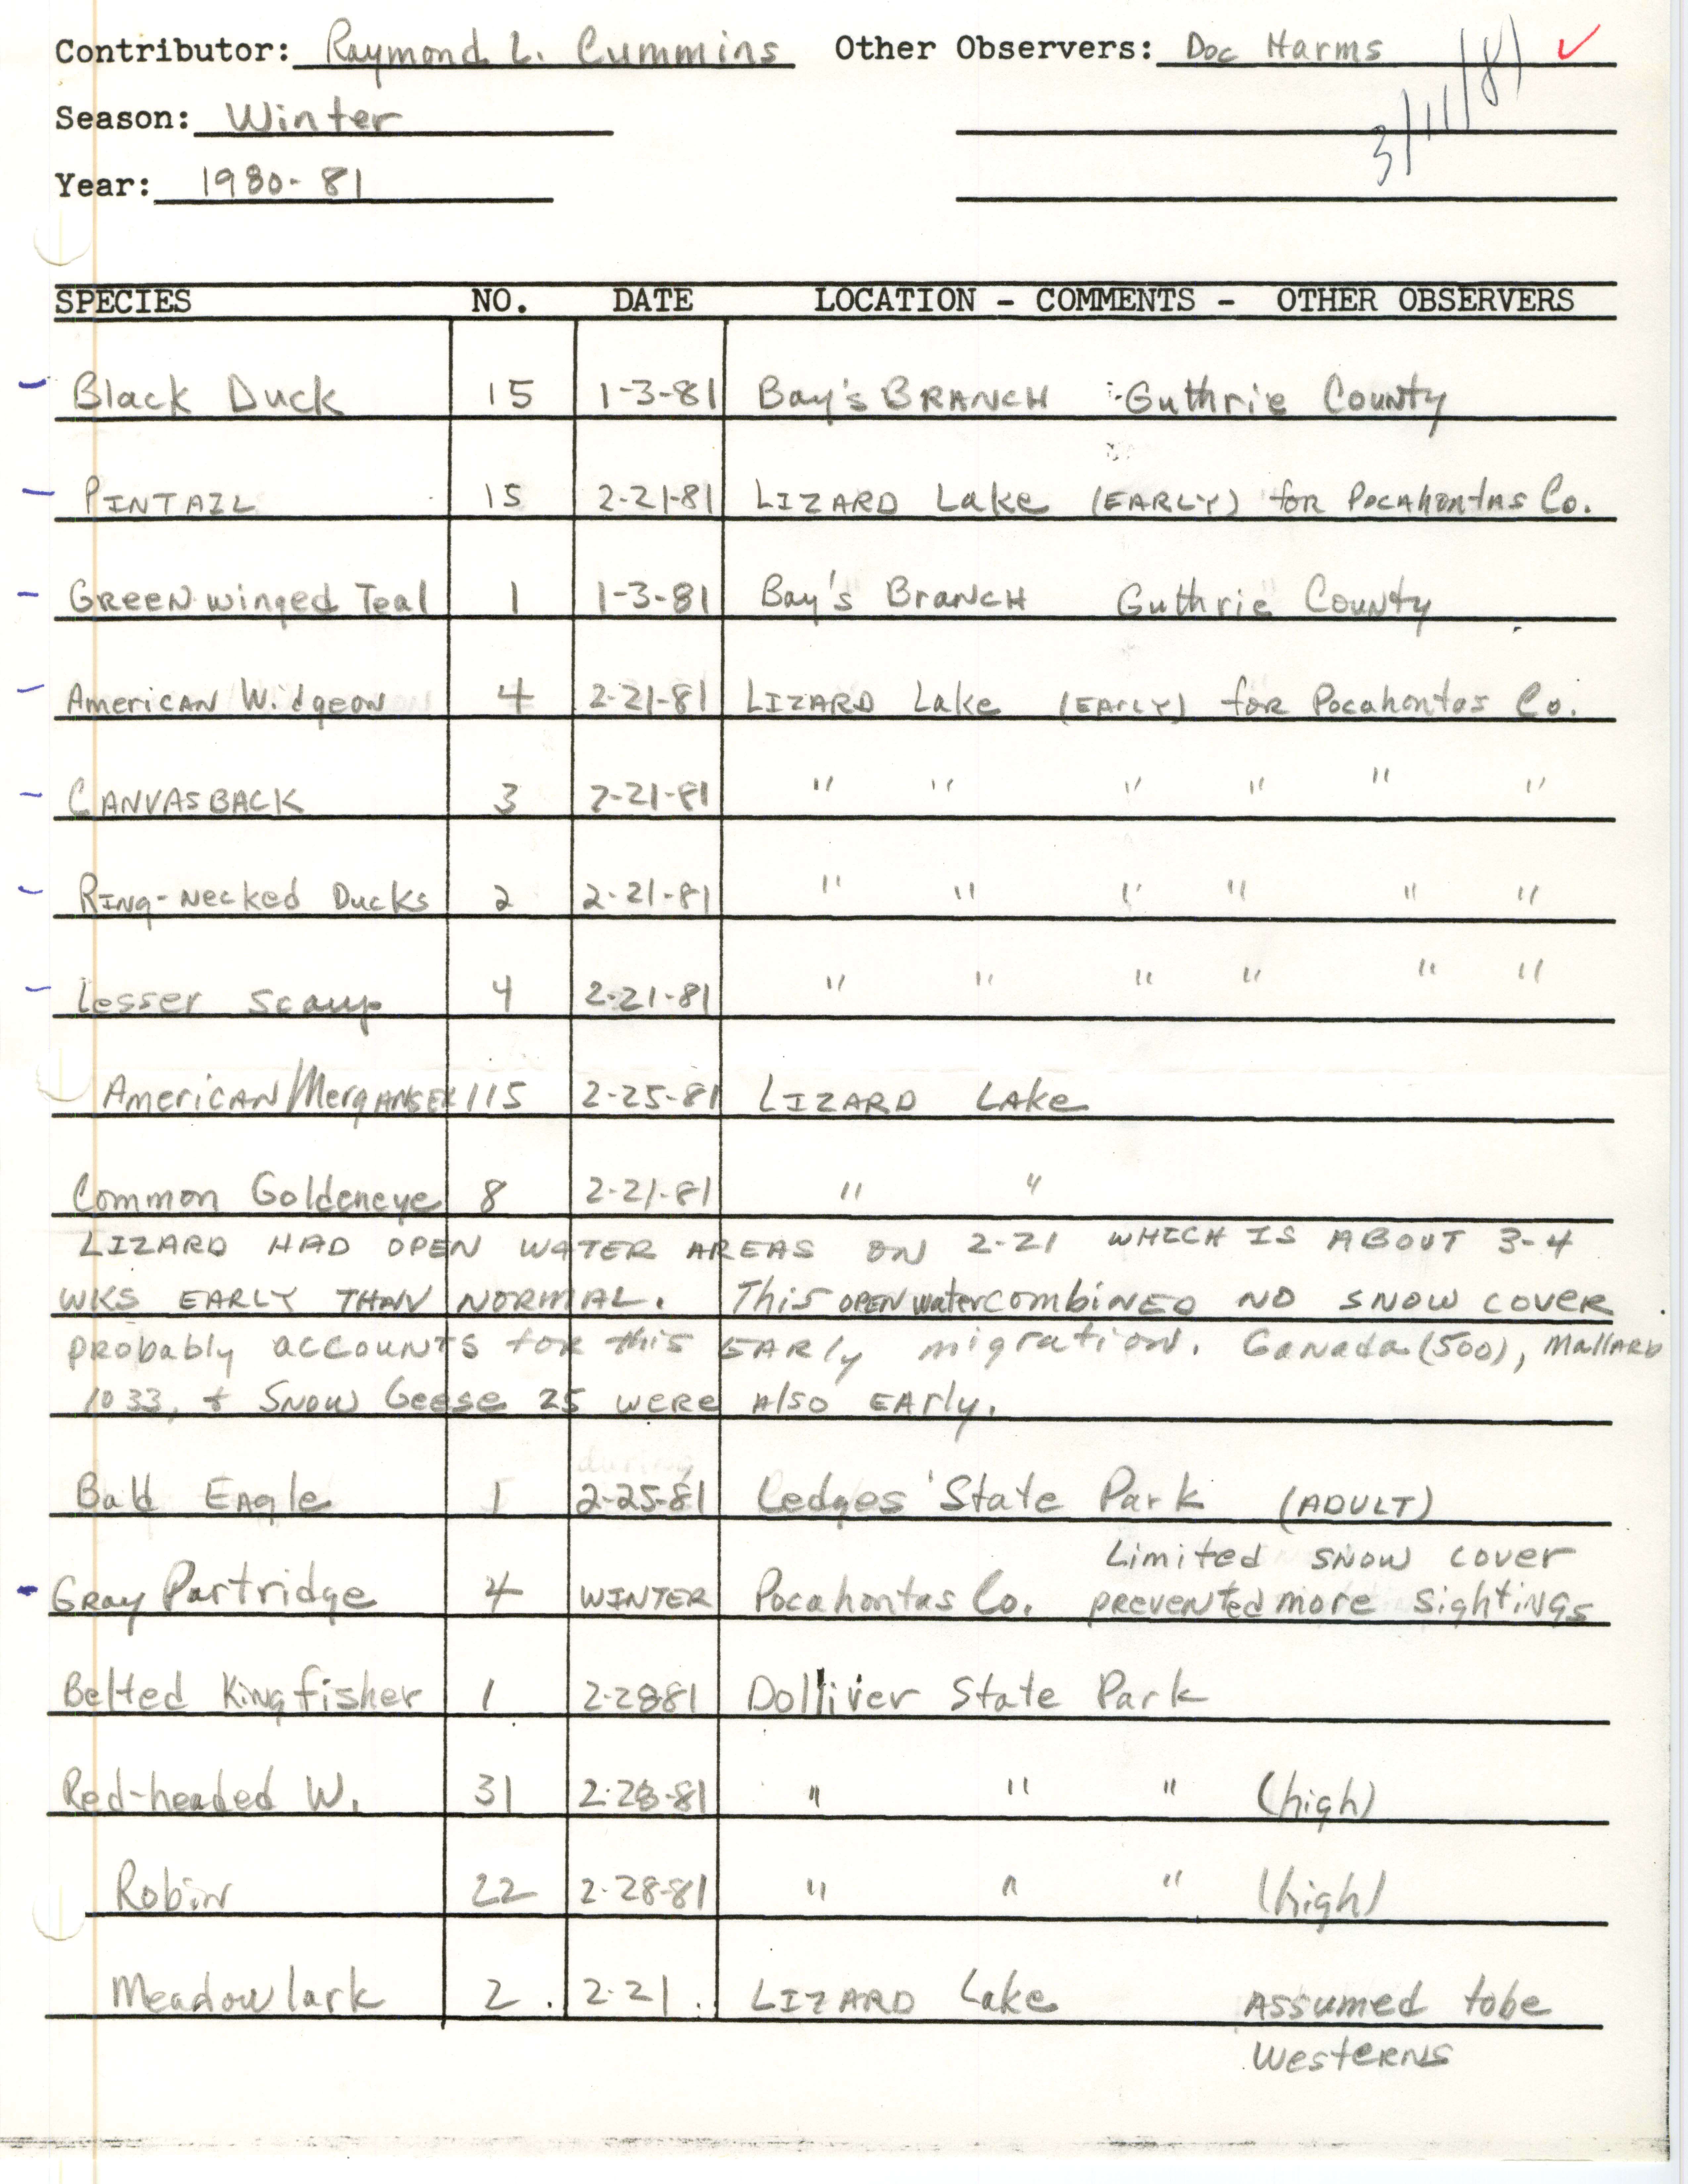 Annotated bird sighting list for winter 1980-1981 compiled by Raymond L. Cummins